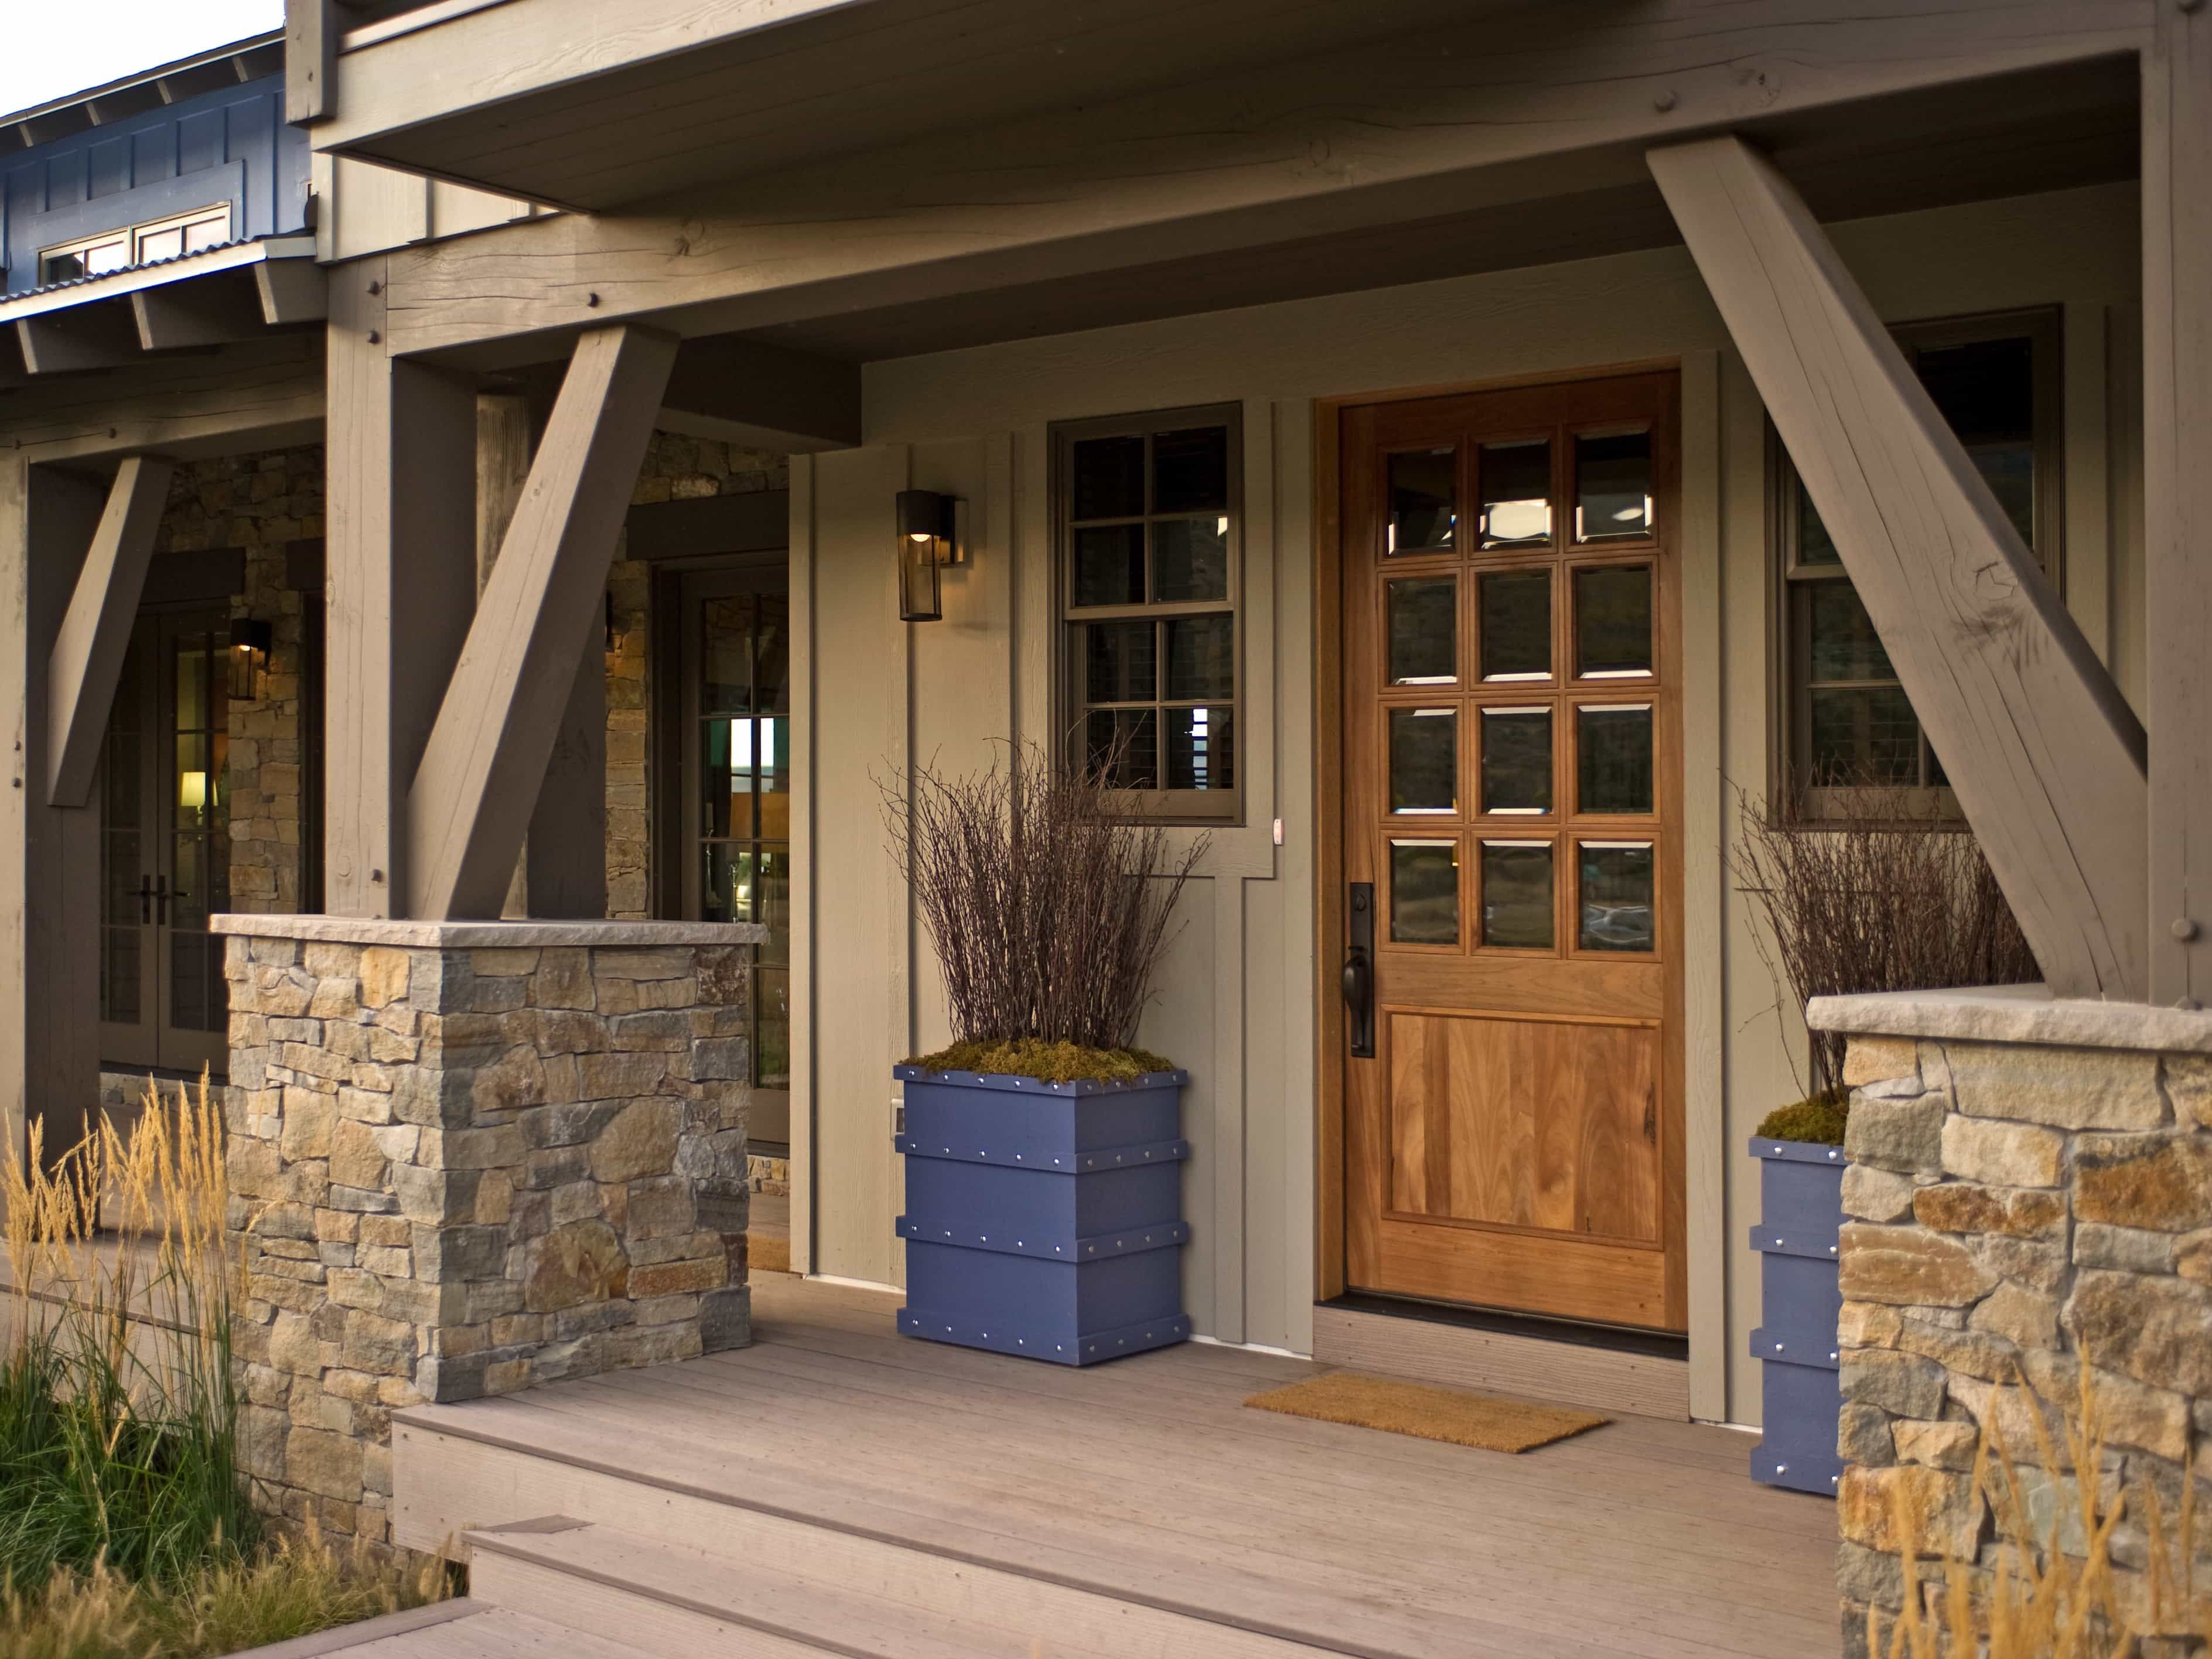 Stone And Wood Pillars For Angled Porch Design (View 11 of 20)